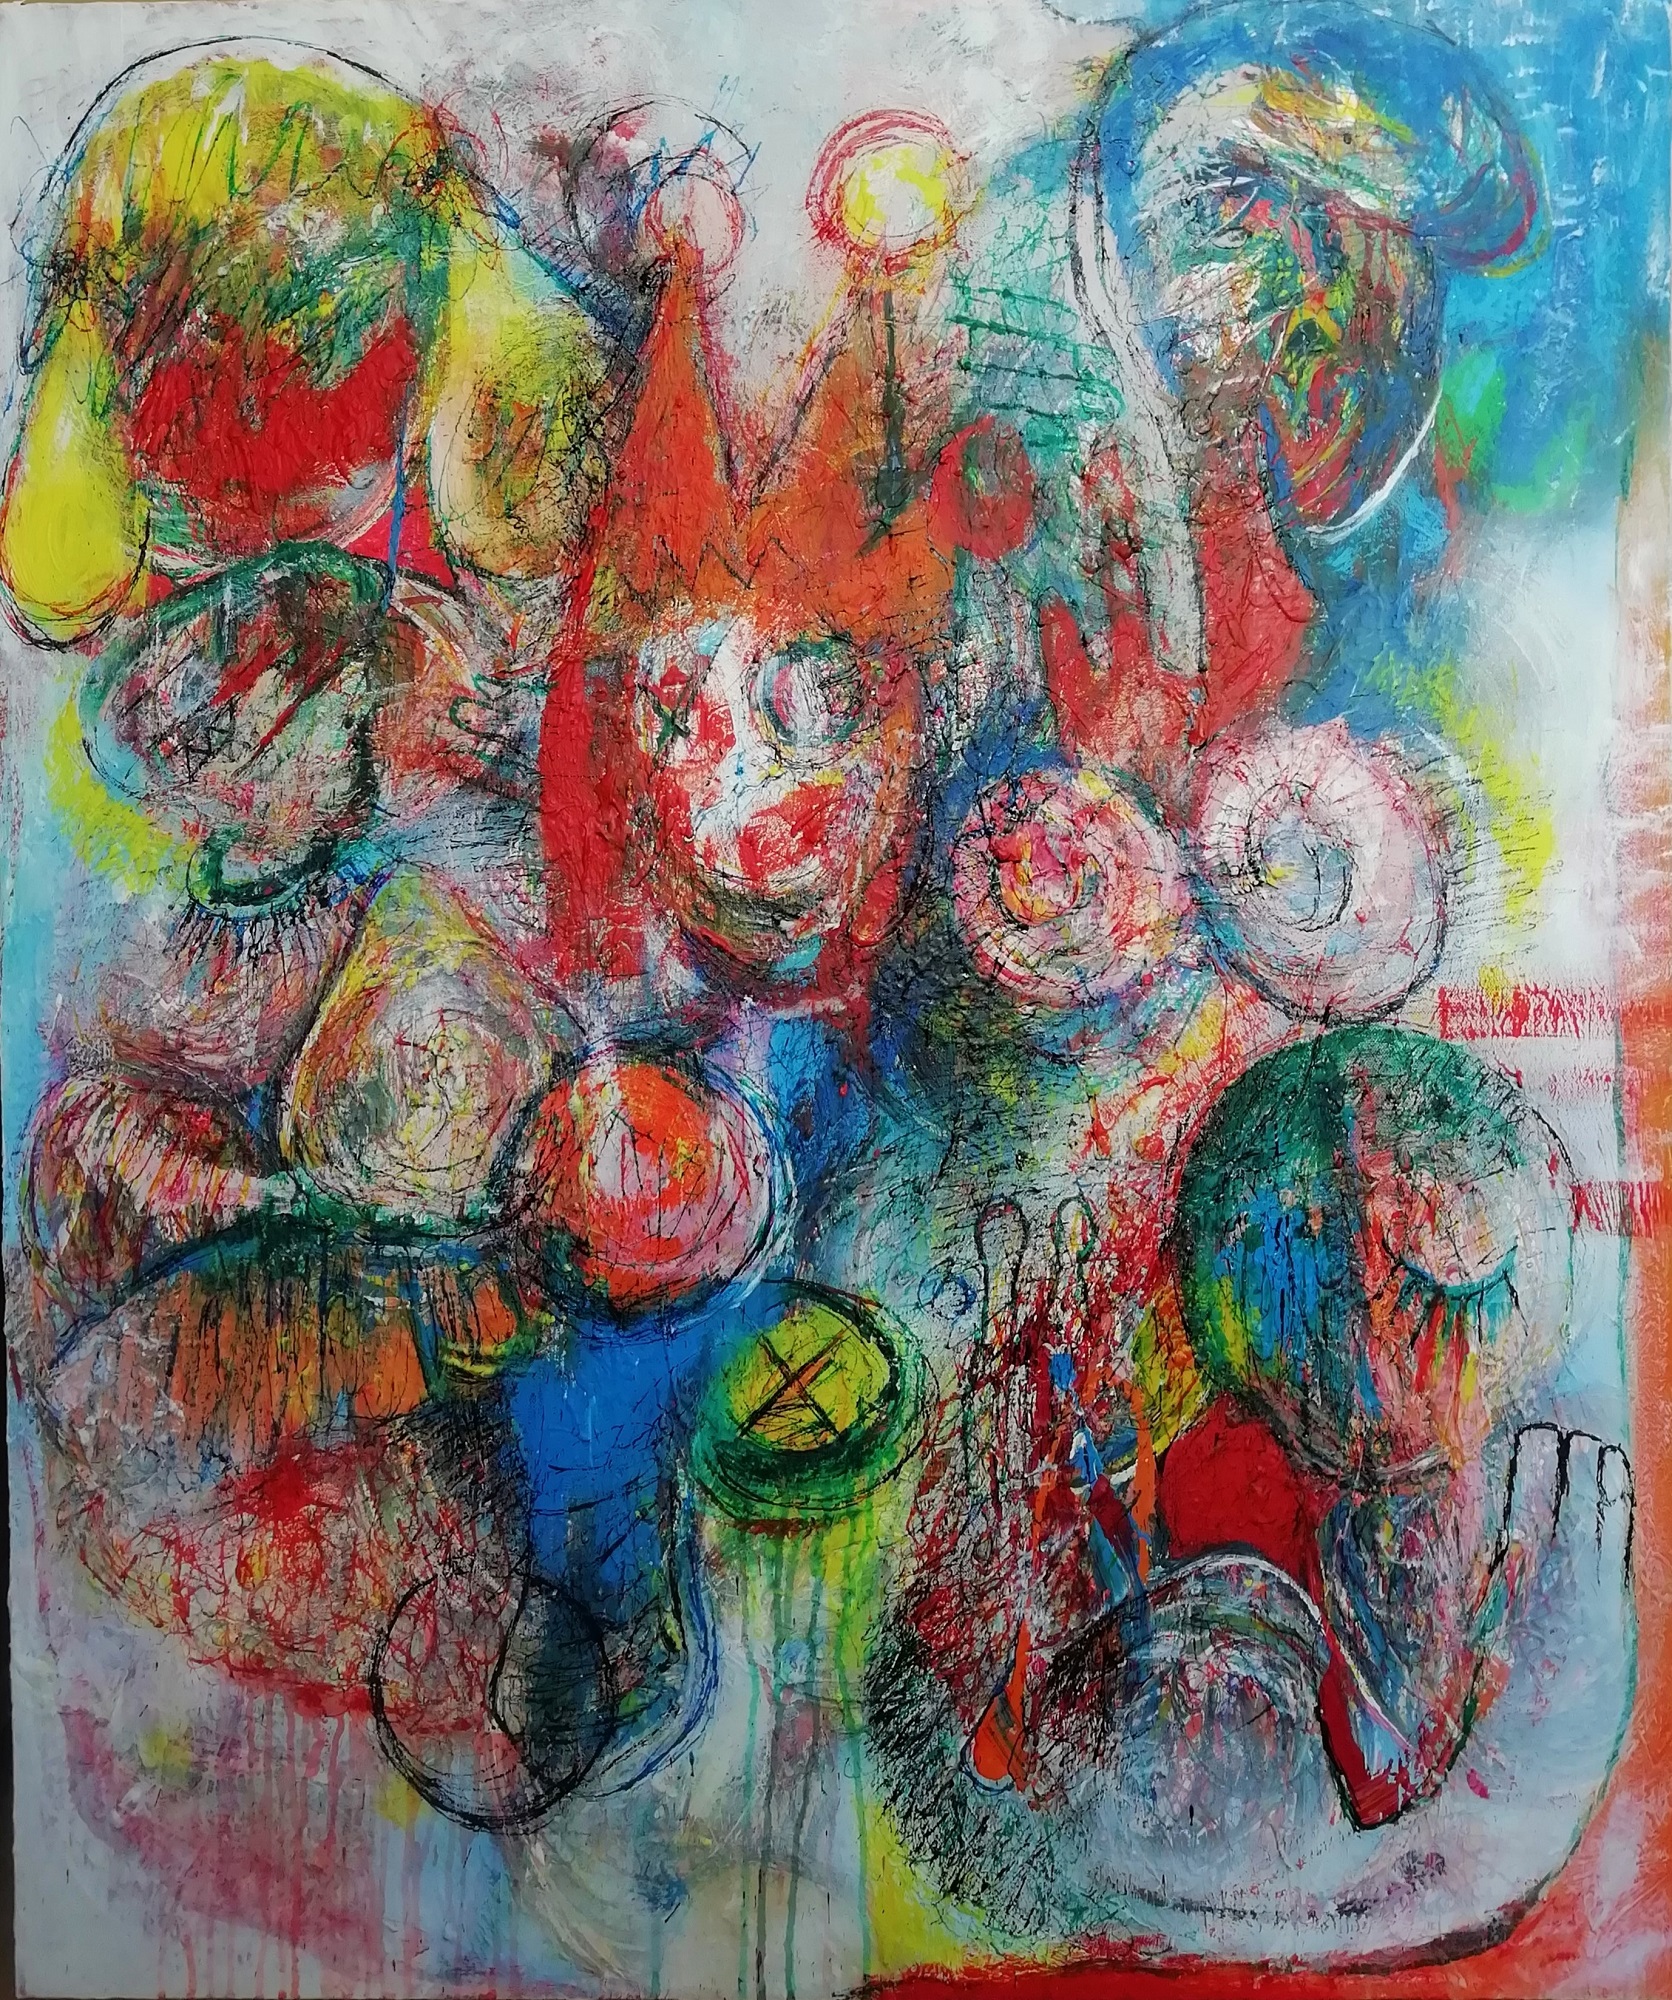 Clown and the world, 100 x 120 cm